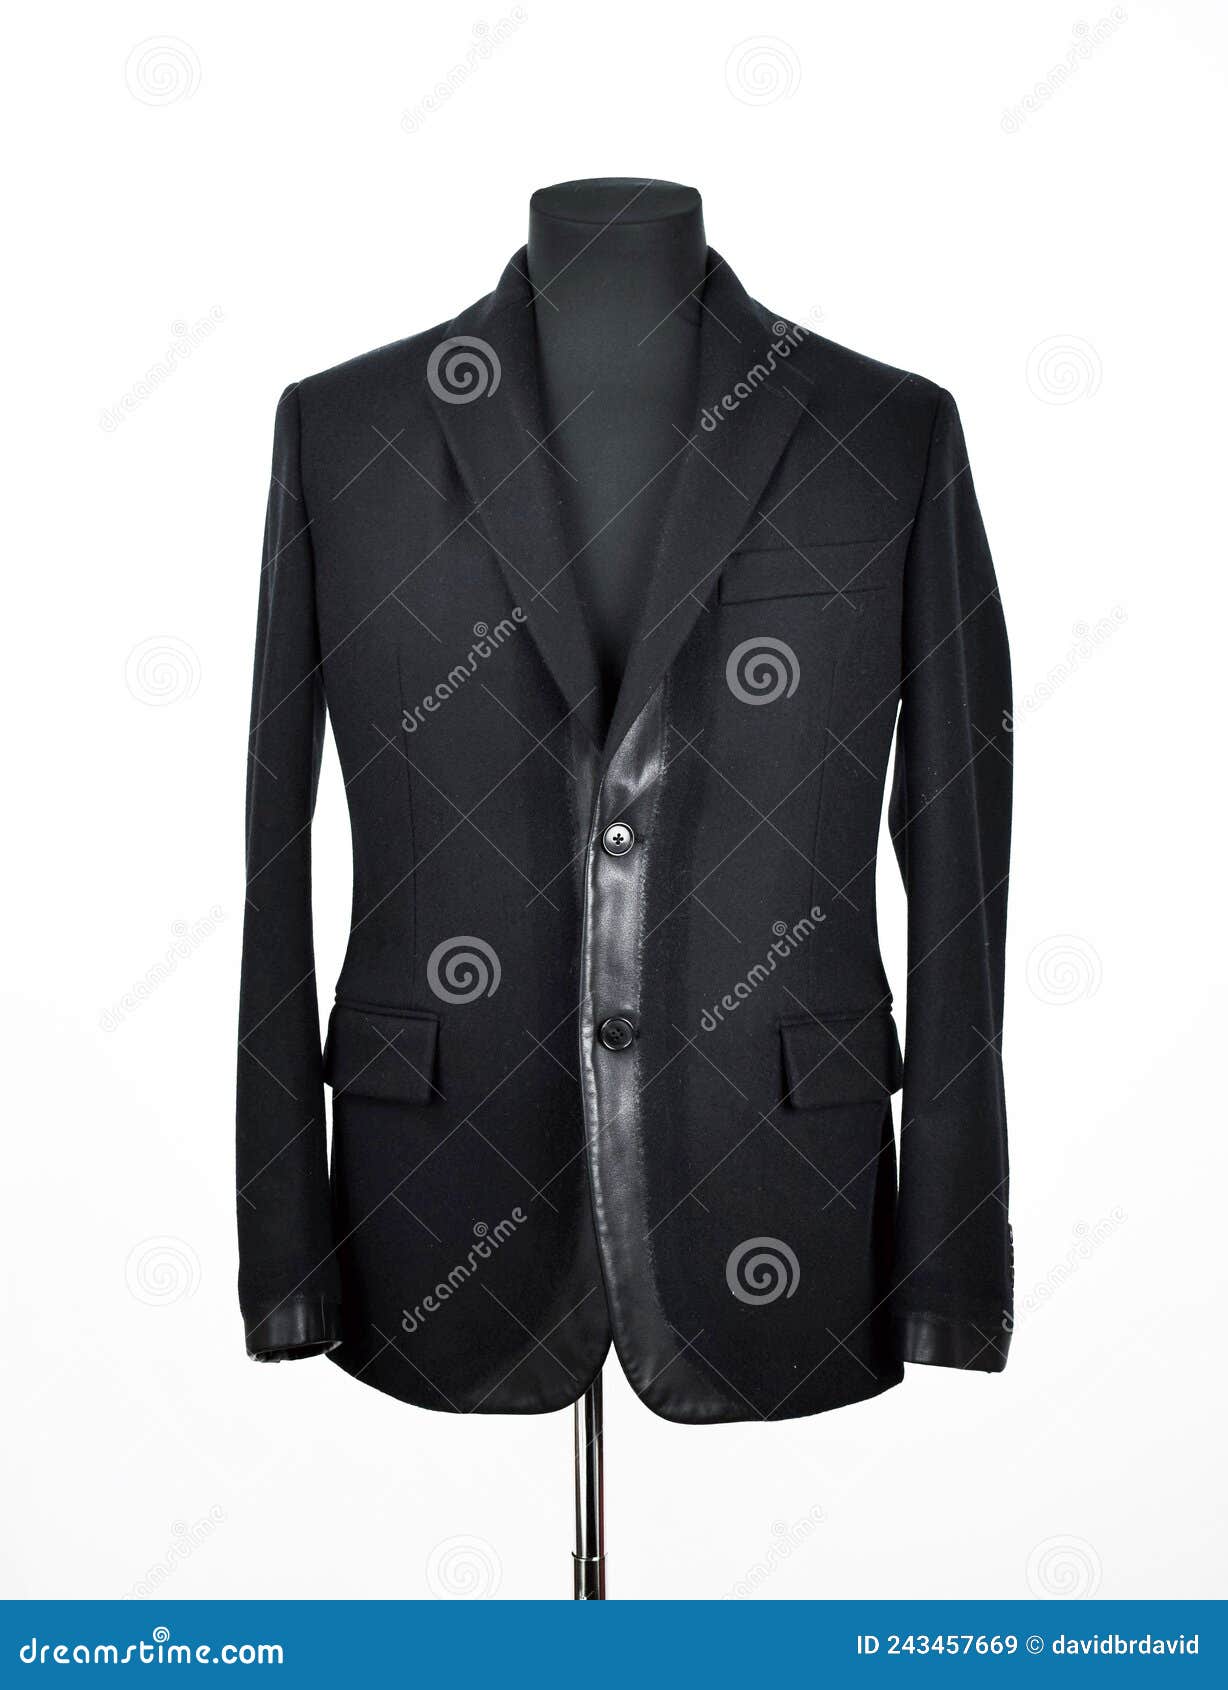 Clothing stock image. Image of suit, pocket, buttons - 243457669